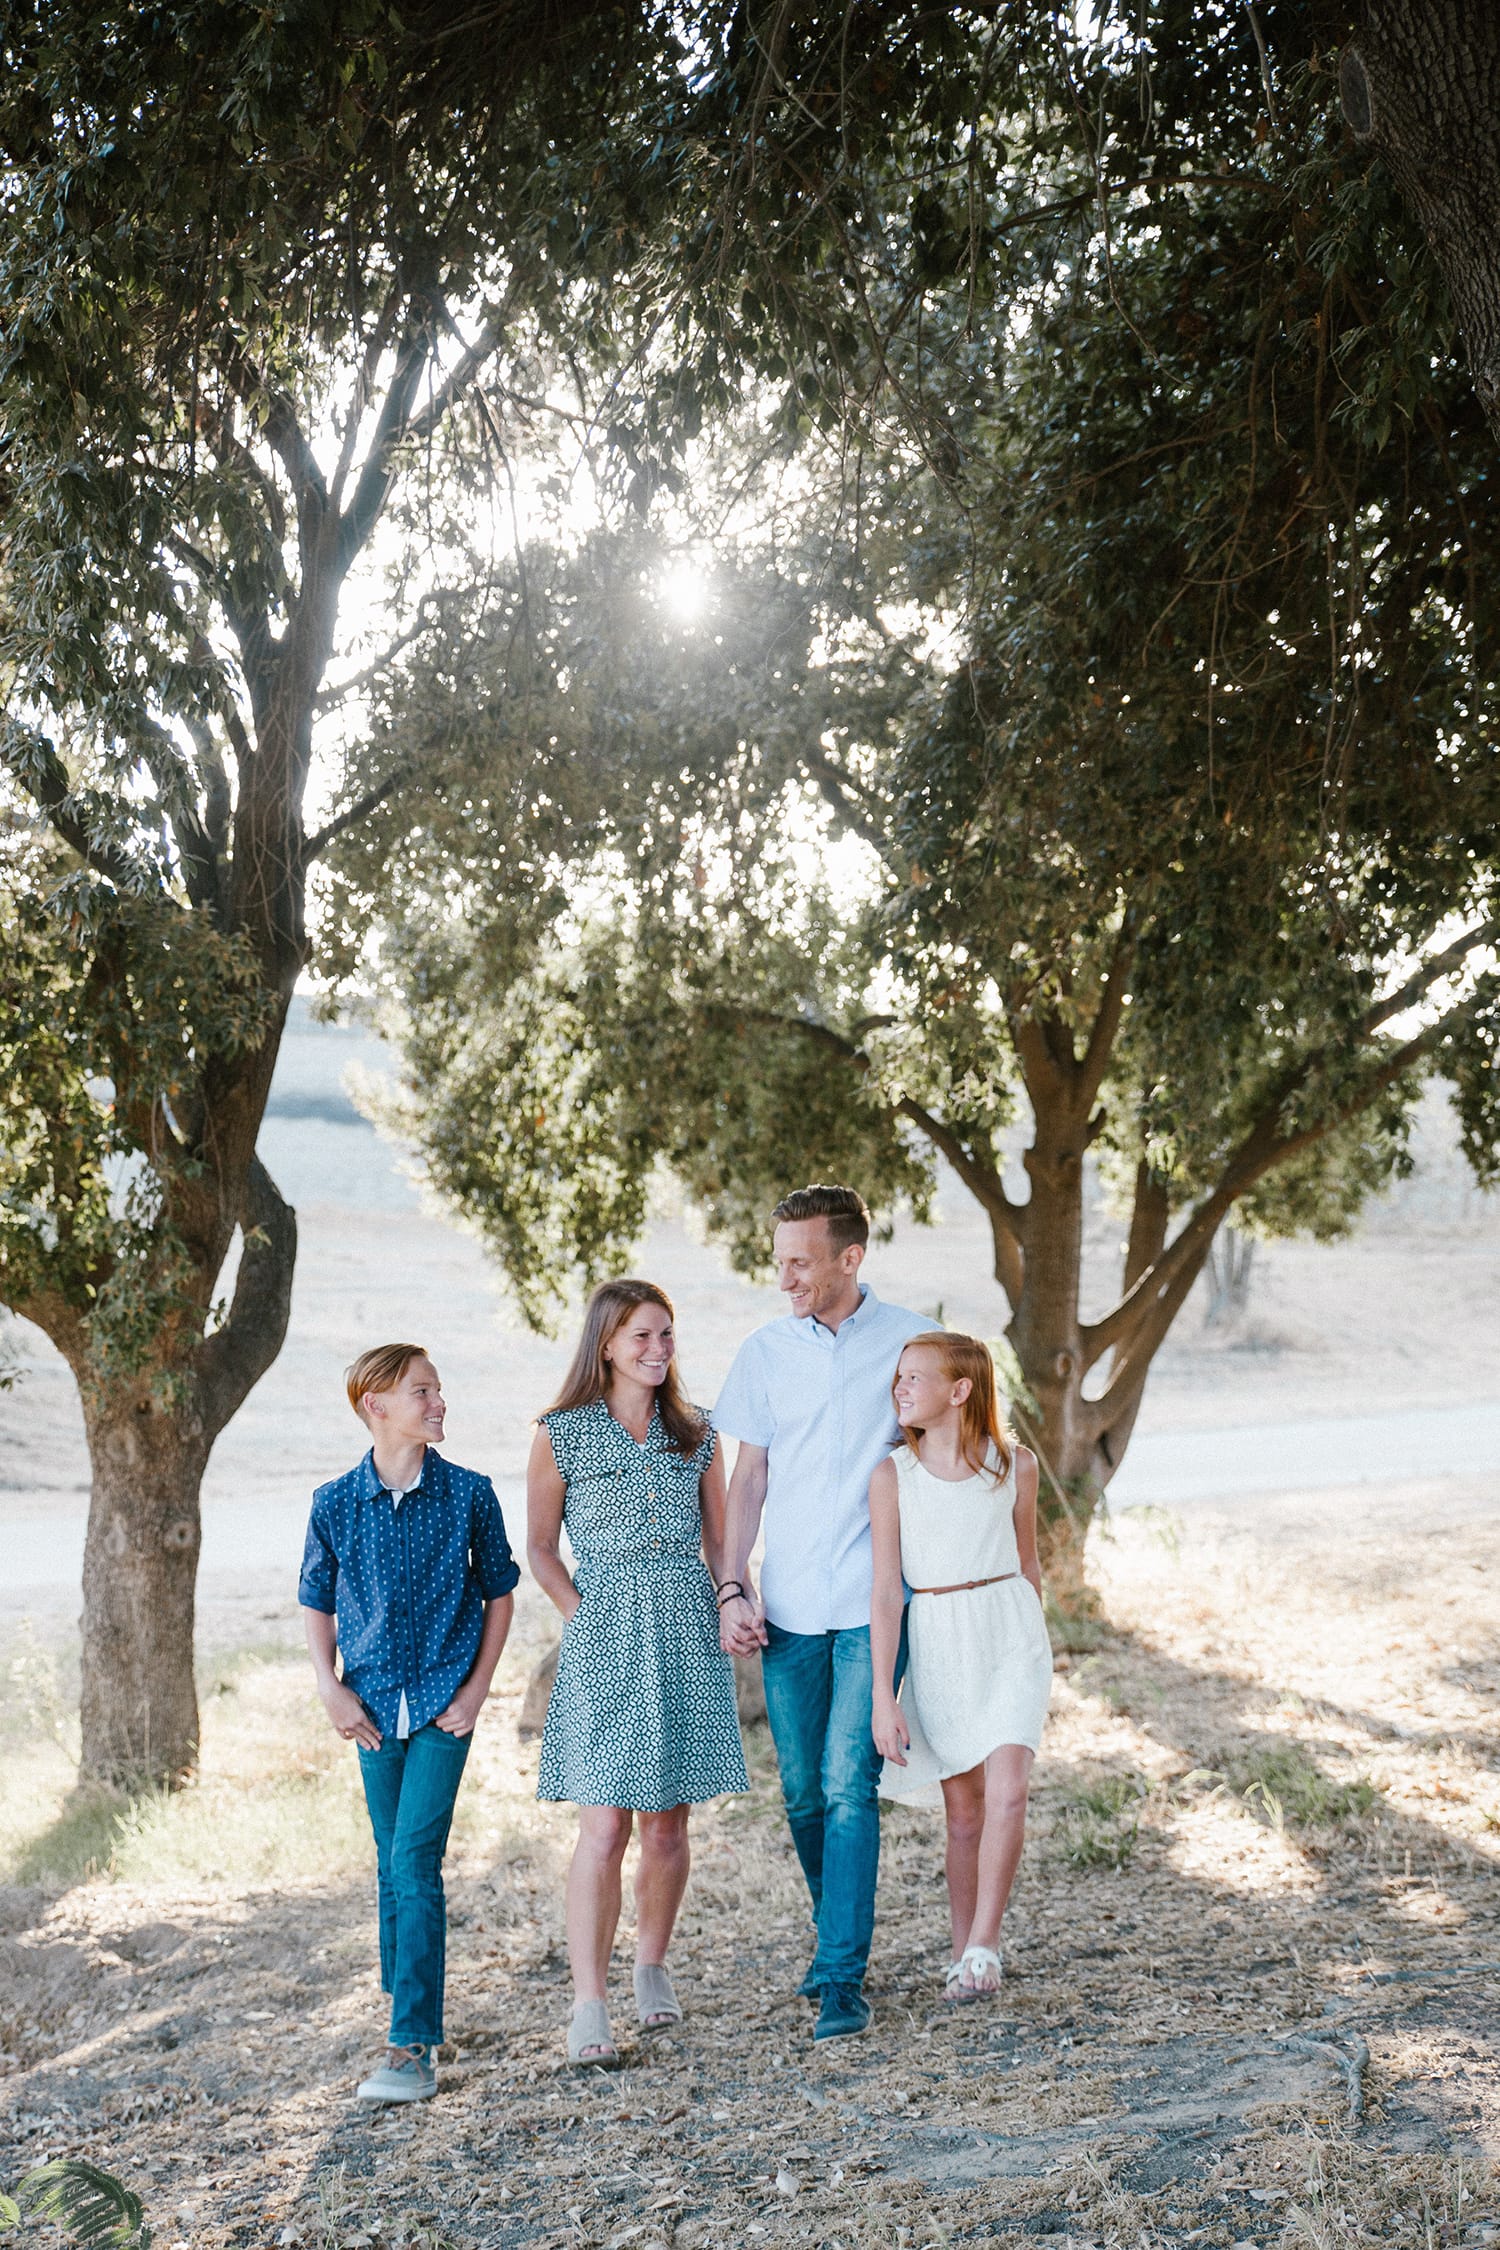 Family Photoshoot Ideas You Need to Try